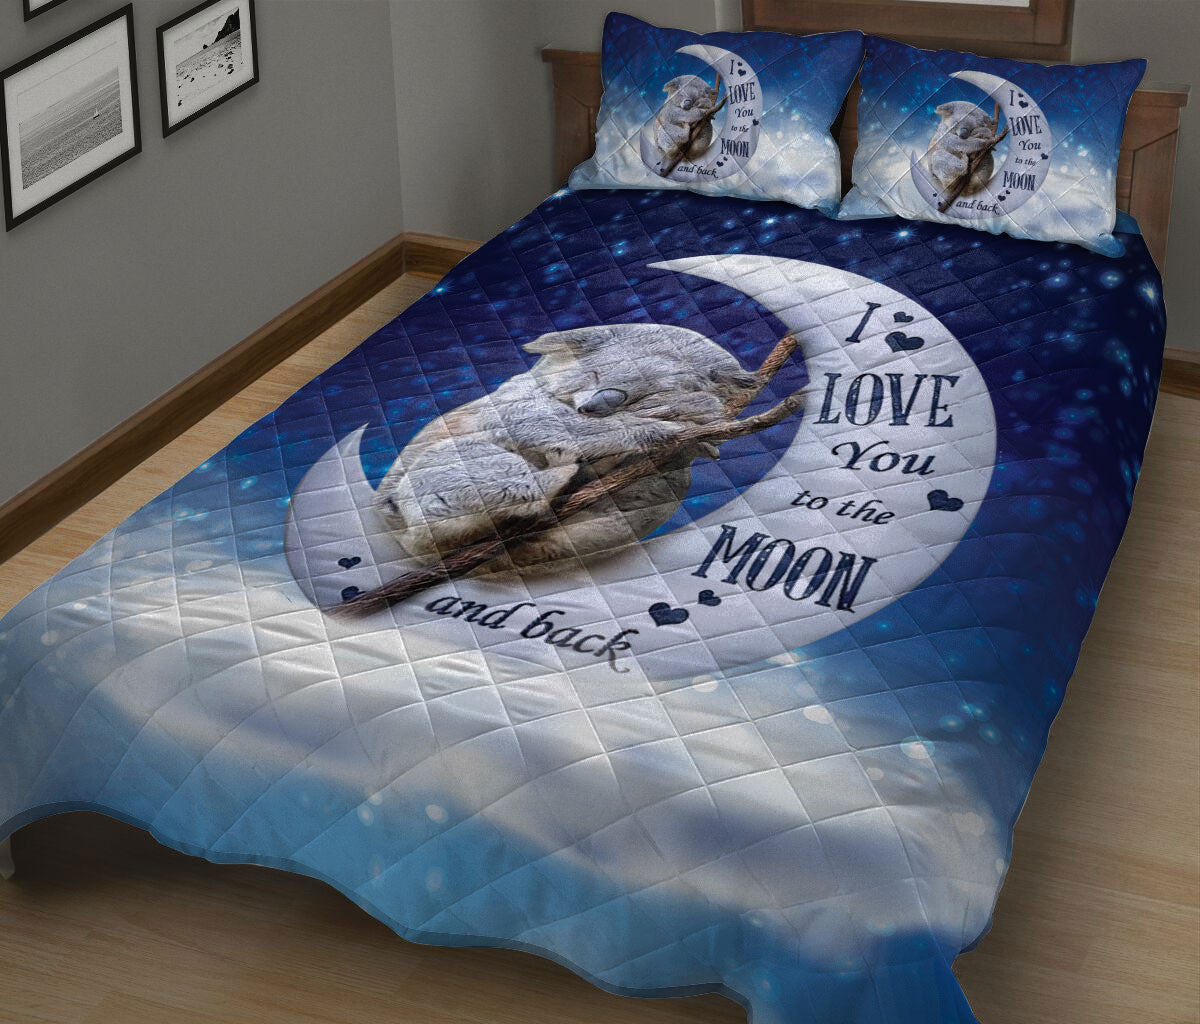 Ohaprints-Quilt-Bed-Set-Pillowcase-Cute-Koala-I-Love-You-To-The-Moon-And-Back-Gift-For-Animal-Lover-Blanket-Bedspread-Bedding-837-King (90'' x 100'')